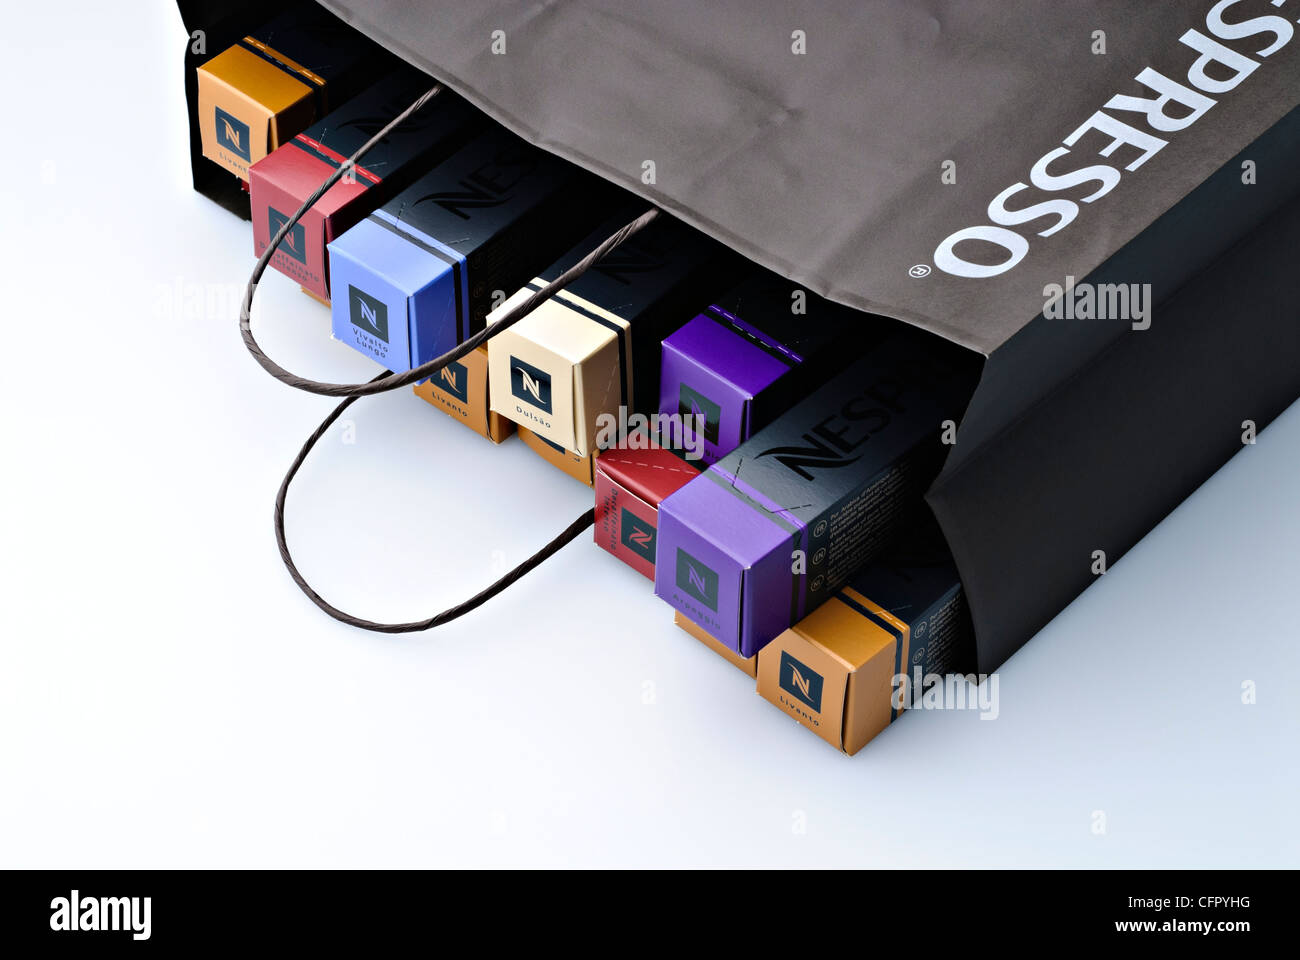 Nespresso Carrier Bag High Resolution Stock Photography and Images - Alamy